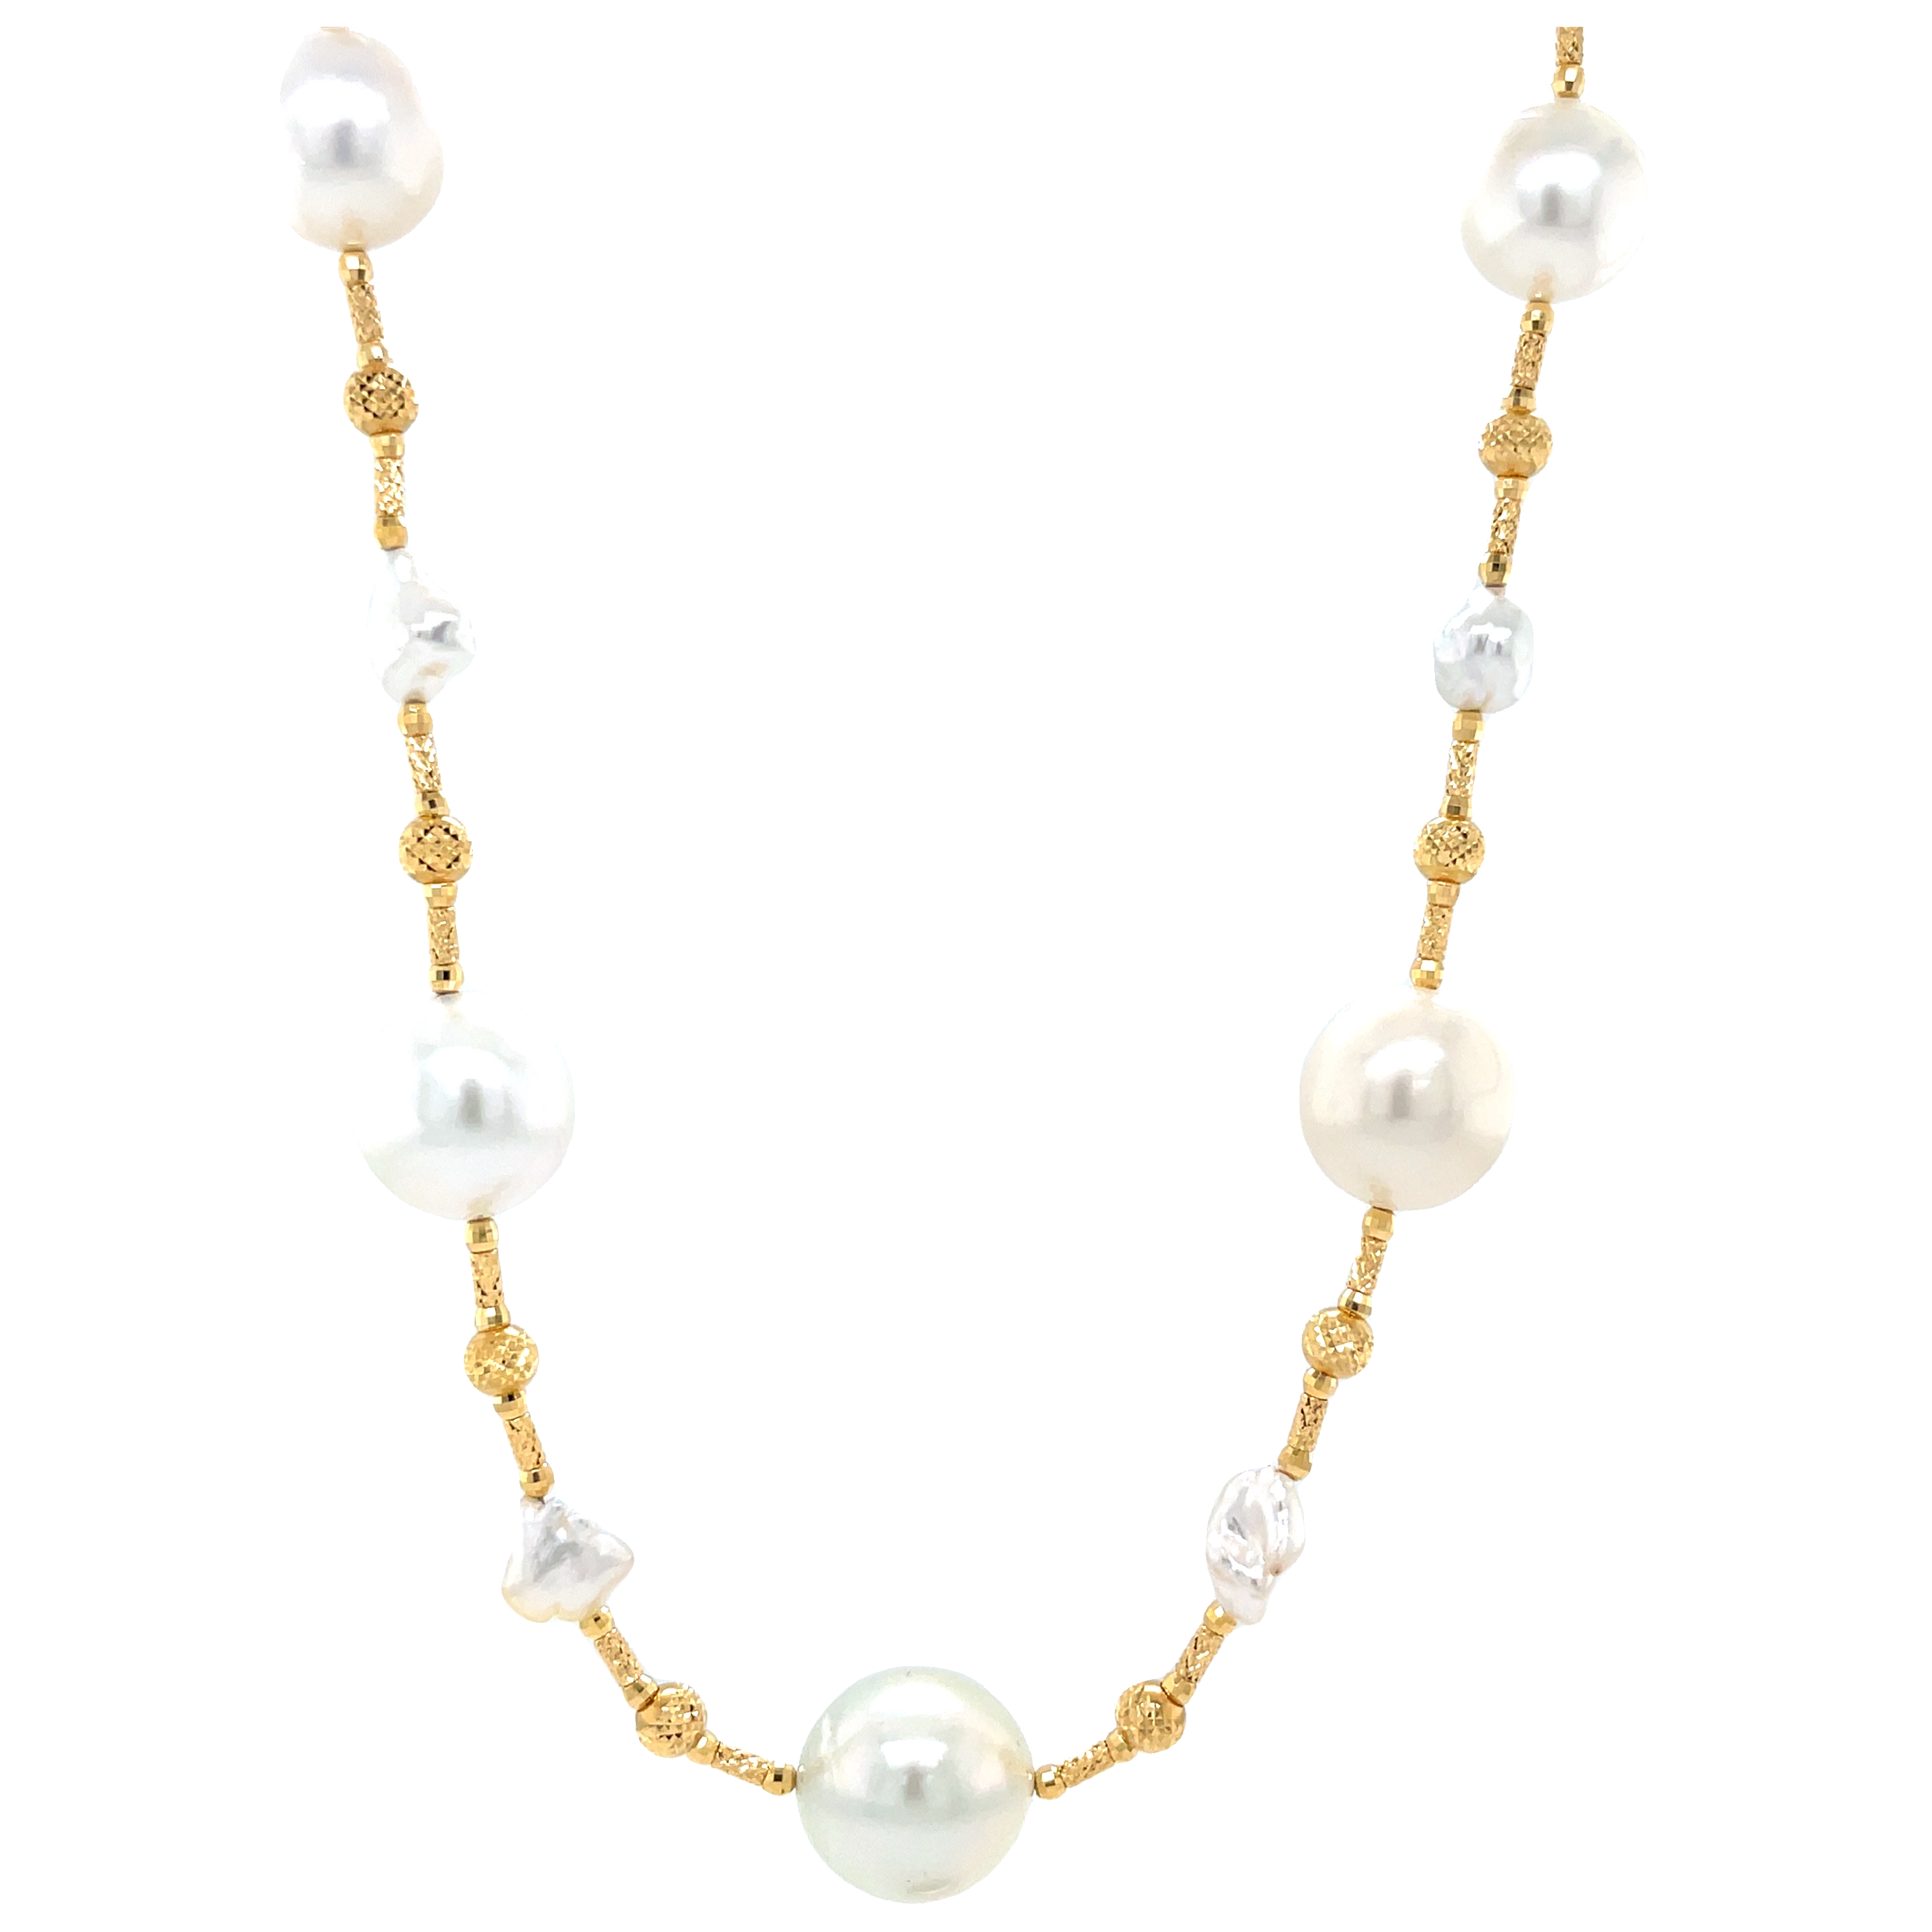 5 South seas pearls  18k yellow gold coil  12.50 mm   6 Kashi pearls 8.00 mm    18" long  adjustable clasp